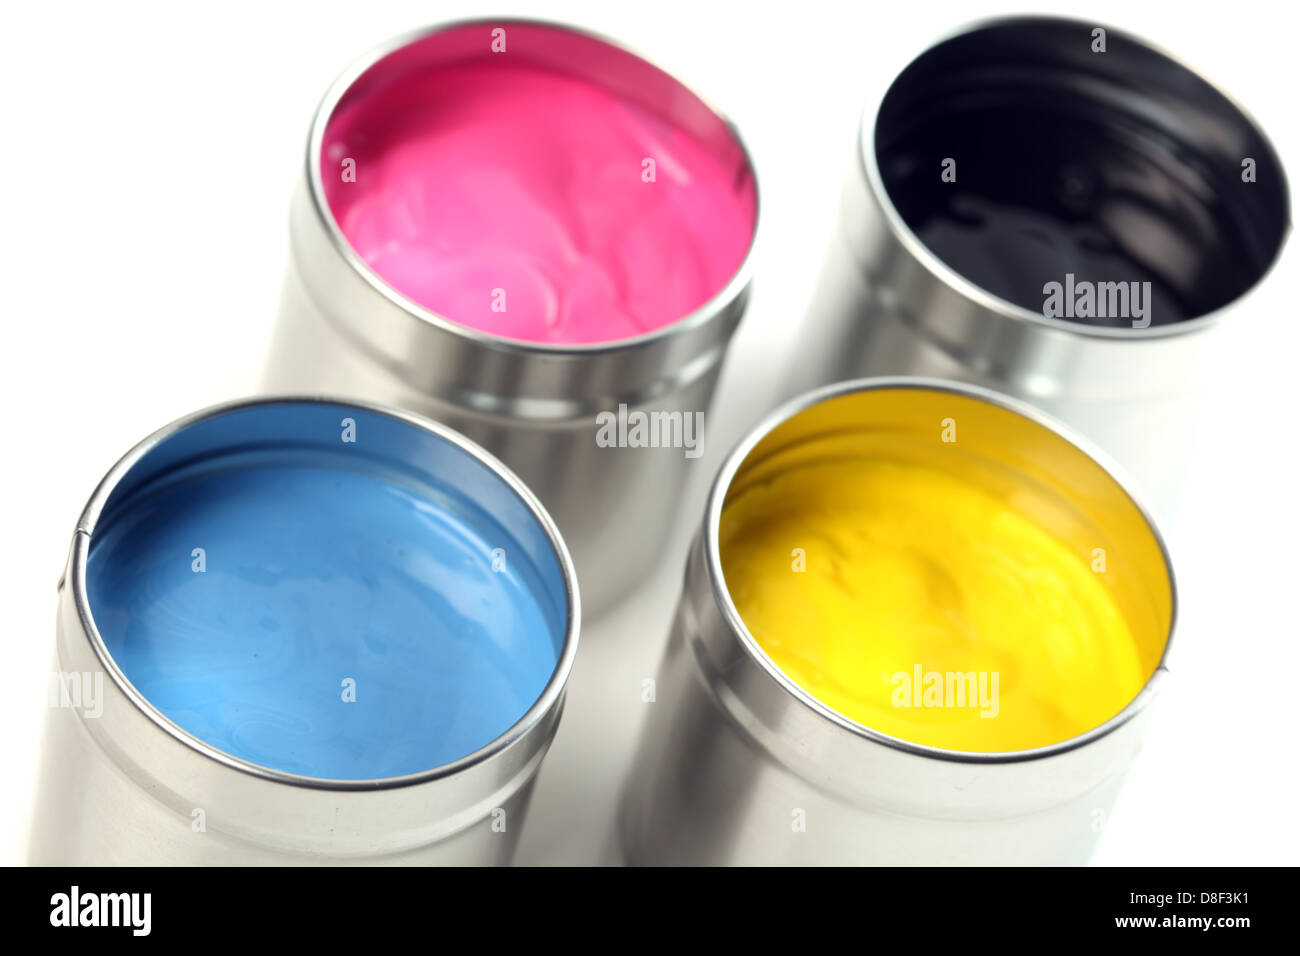 CMYK cans of paint Stock Photo